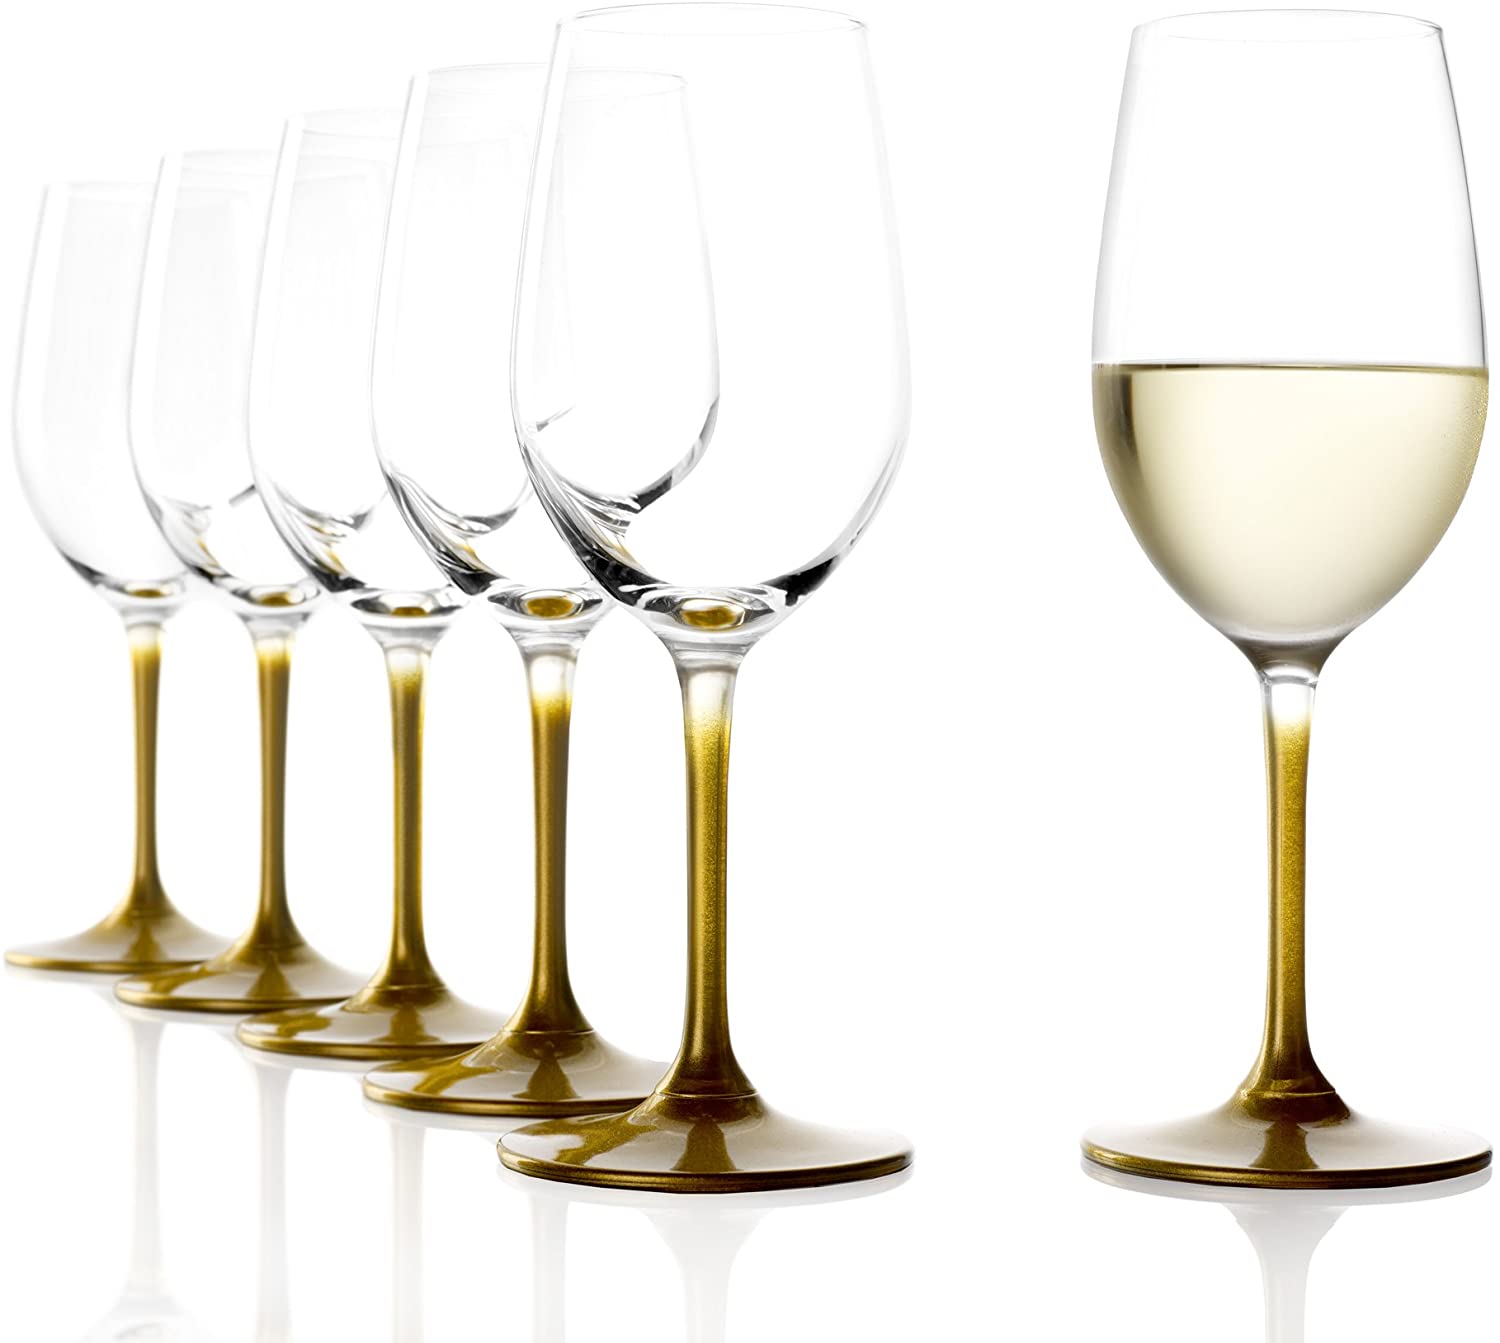 Stölzle Lausitz White Wine Glasses Event, 360 ml, Set of 6, Handle in Gold, Silver or Bronze, Universal and Highly Functional White Wine Glasses, Dishwasher Safe (Gold)